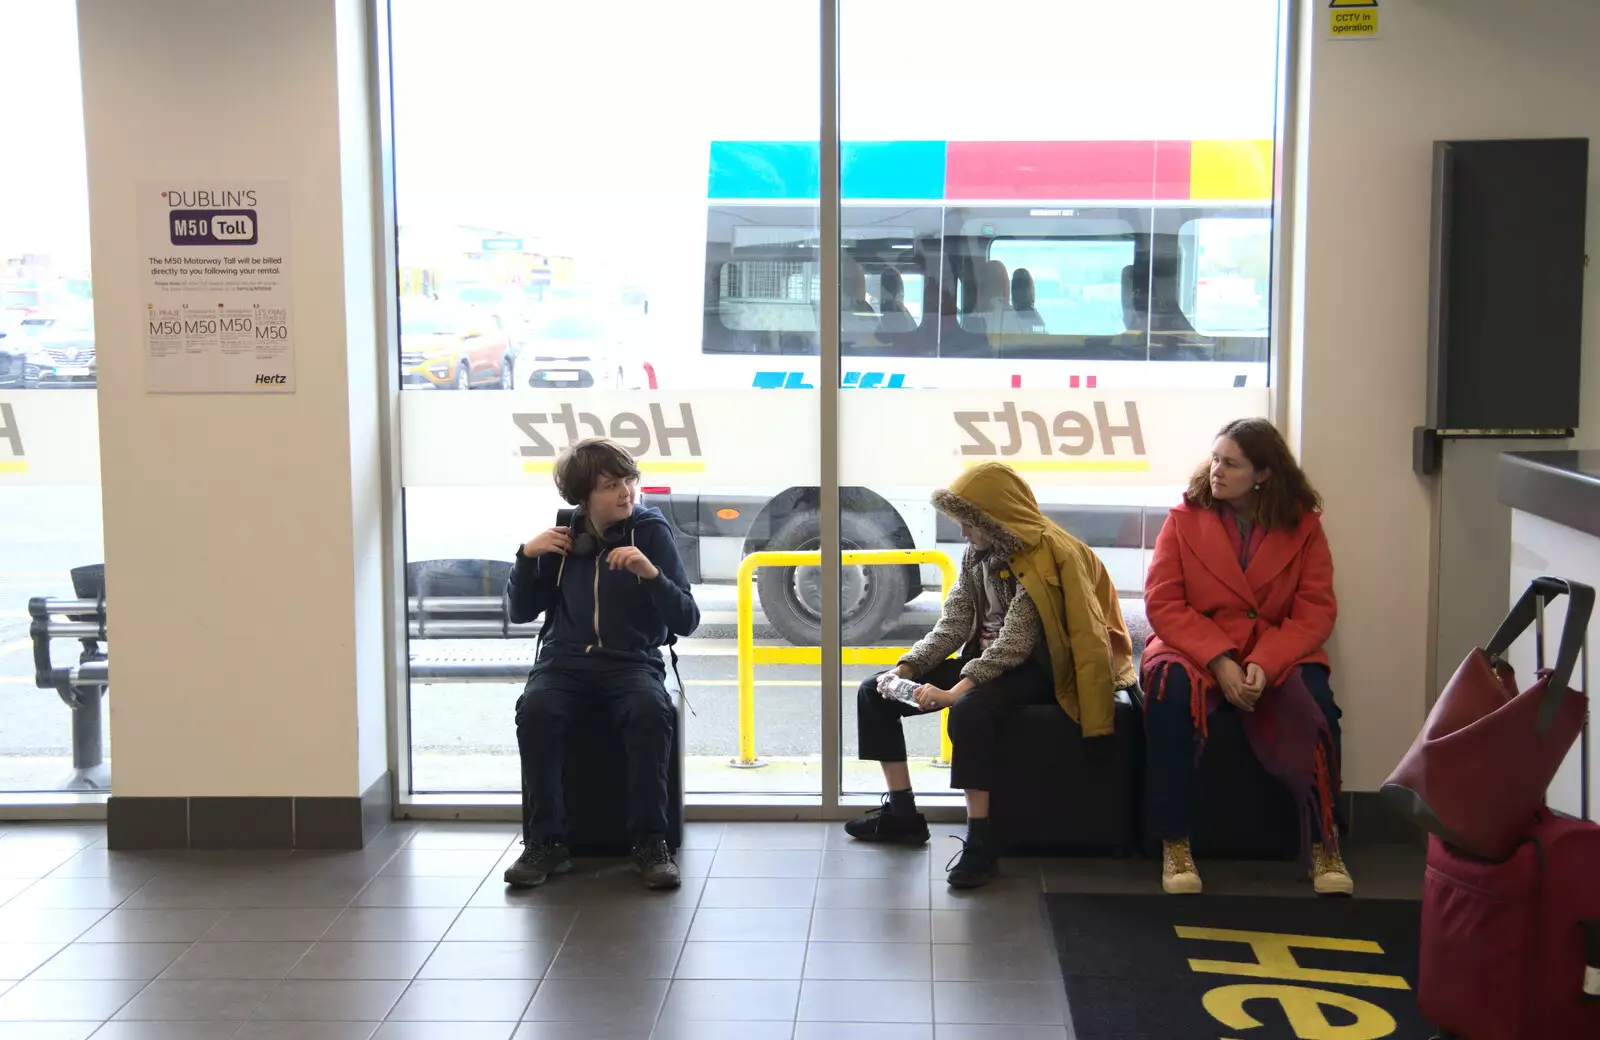 We wait in the Hertz/Dollar car-hire office, from Blackrock North and Newgrange, County Louth, Ireland - 16th February 2023